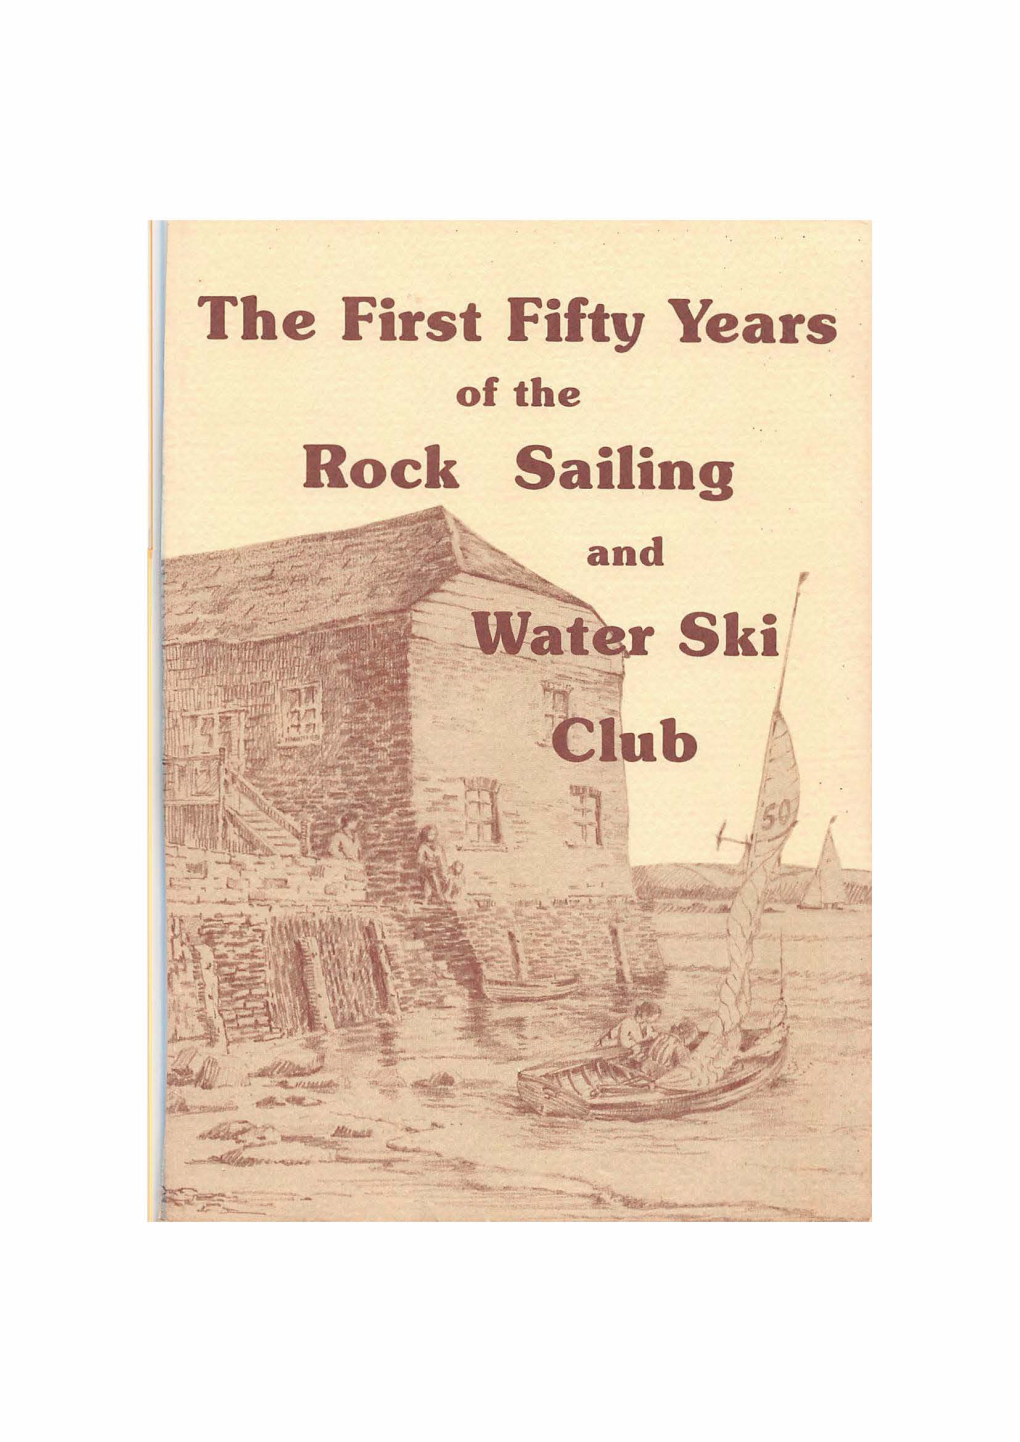 The First Fifty Years Rock Sailing